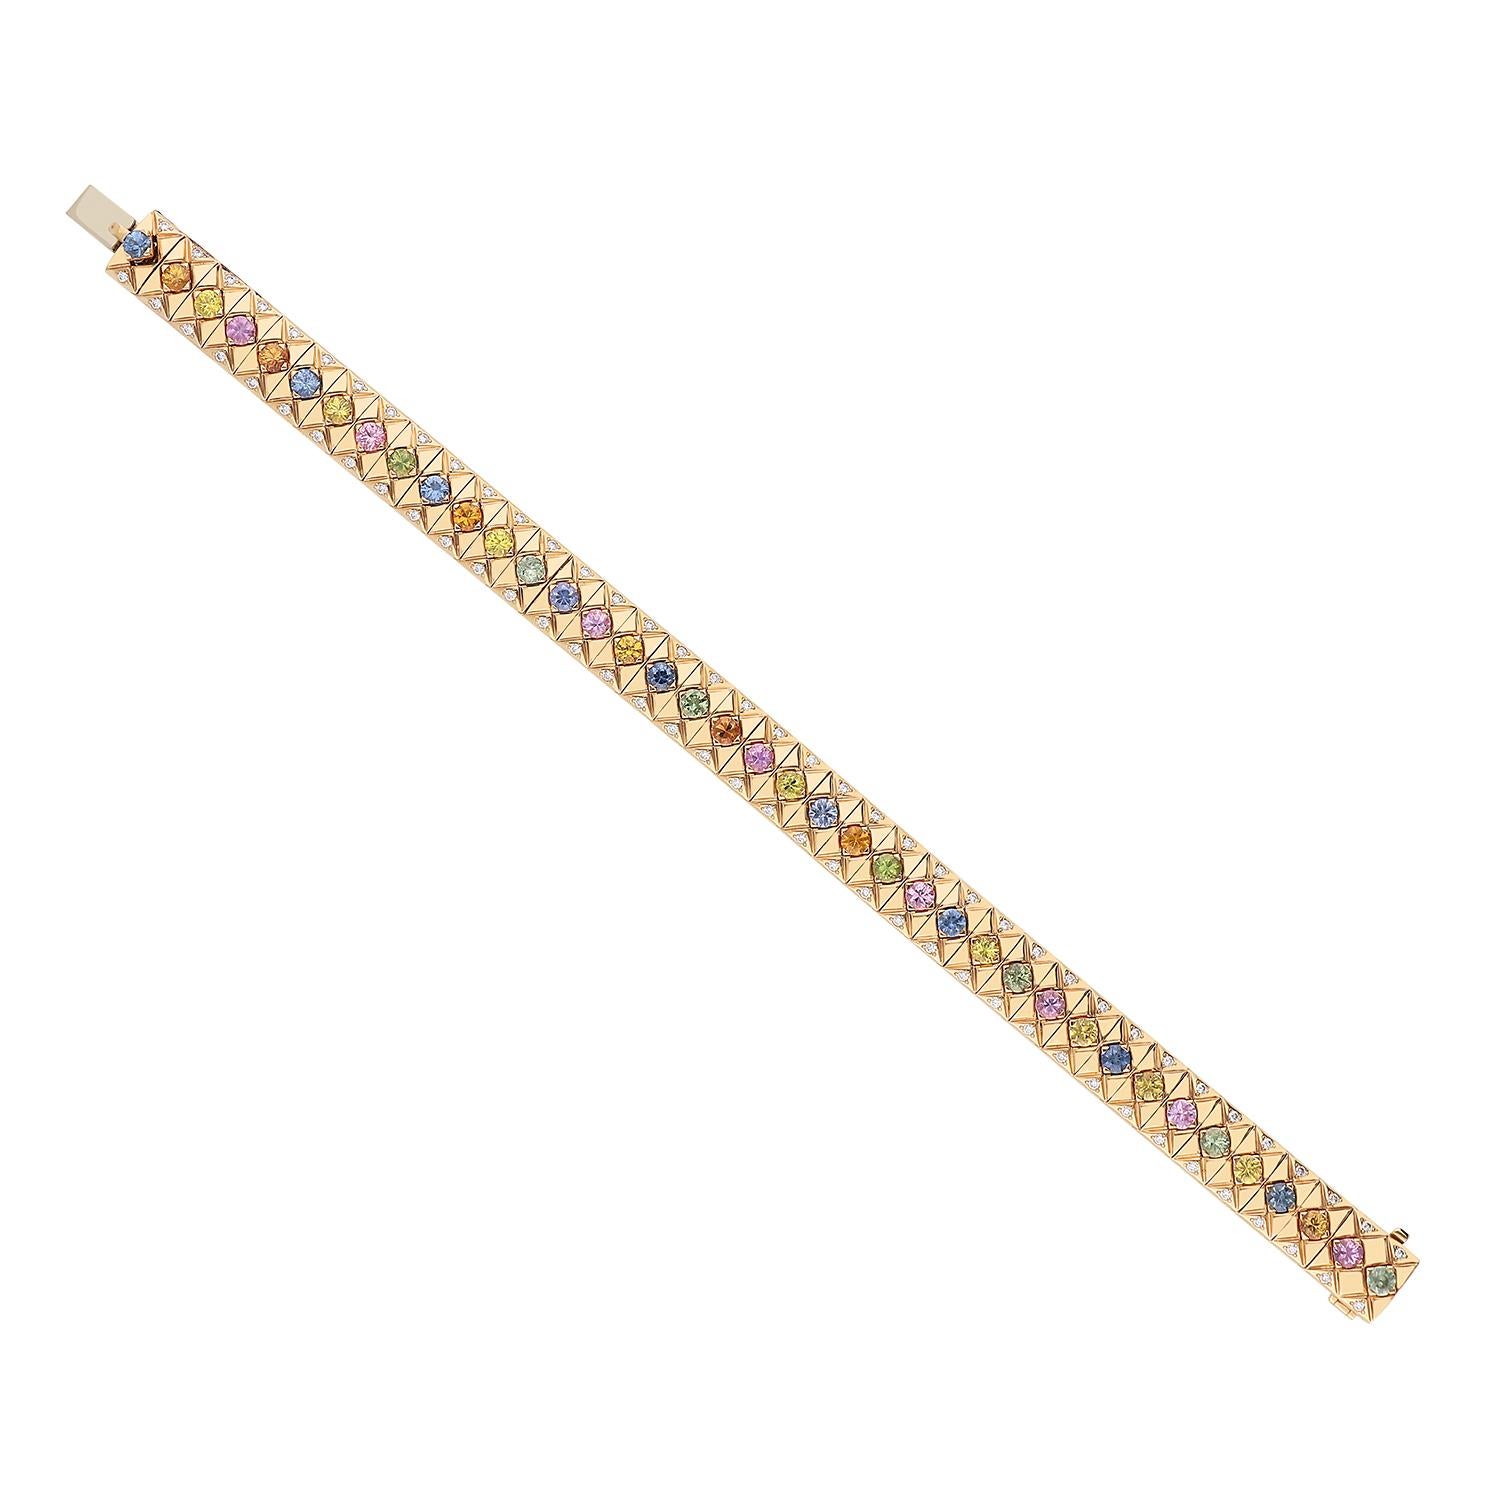 A magnificent 18kt rose gold bracelet weighing a total of 39.30 grams with multi-color brilliant-cut sapphires for 5.56 carats, set on flat tips. On either side of each sapphire are brilliant-cut diamonds, color G SI clarity, totaling 0.61 carats.